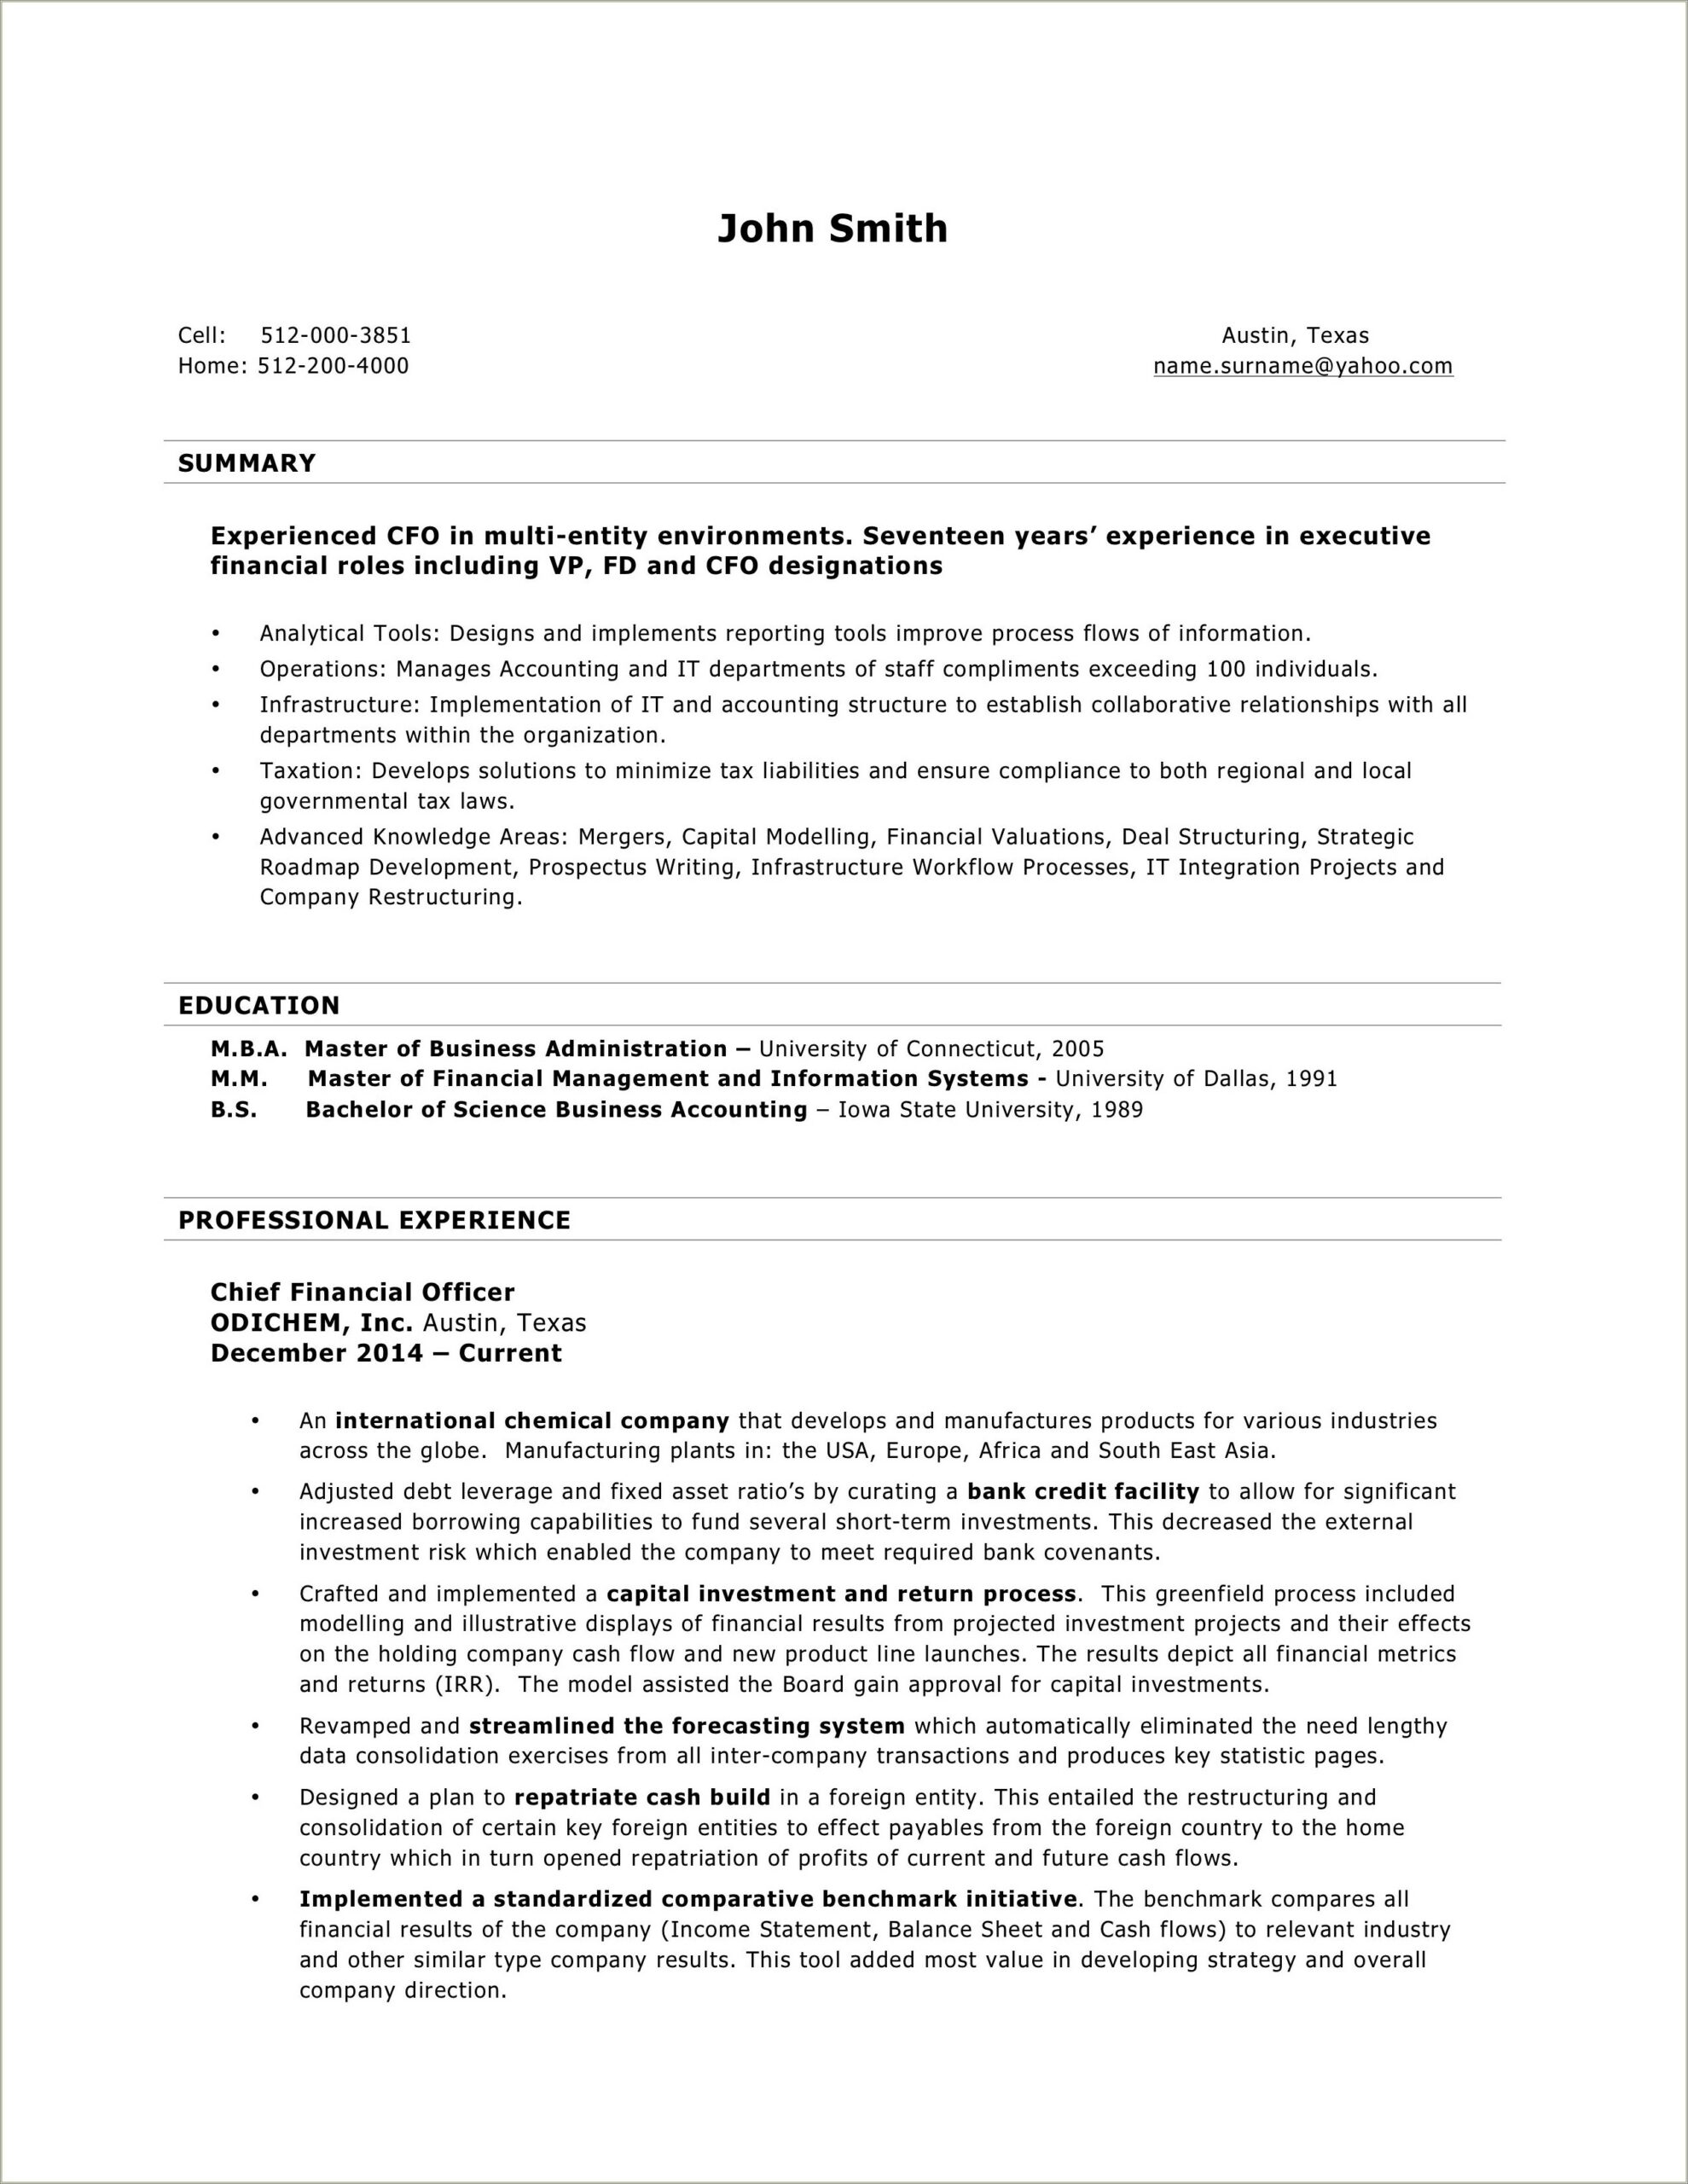 Best Resume Formats 2019 It Manager Free